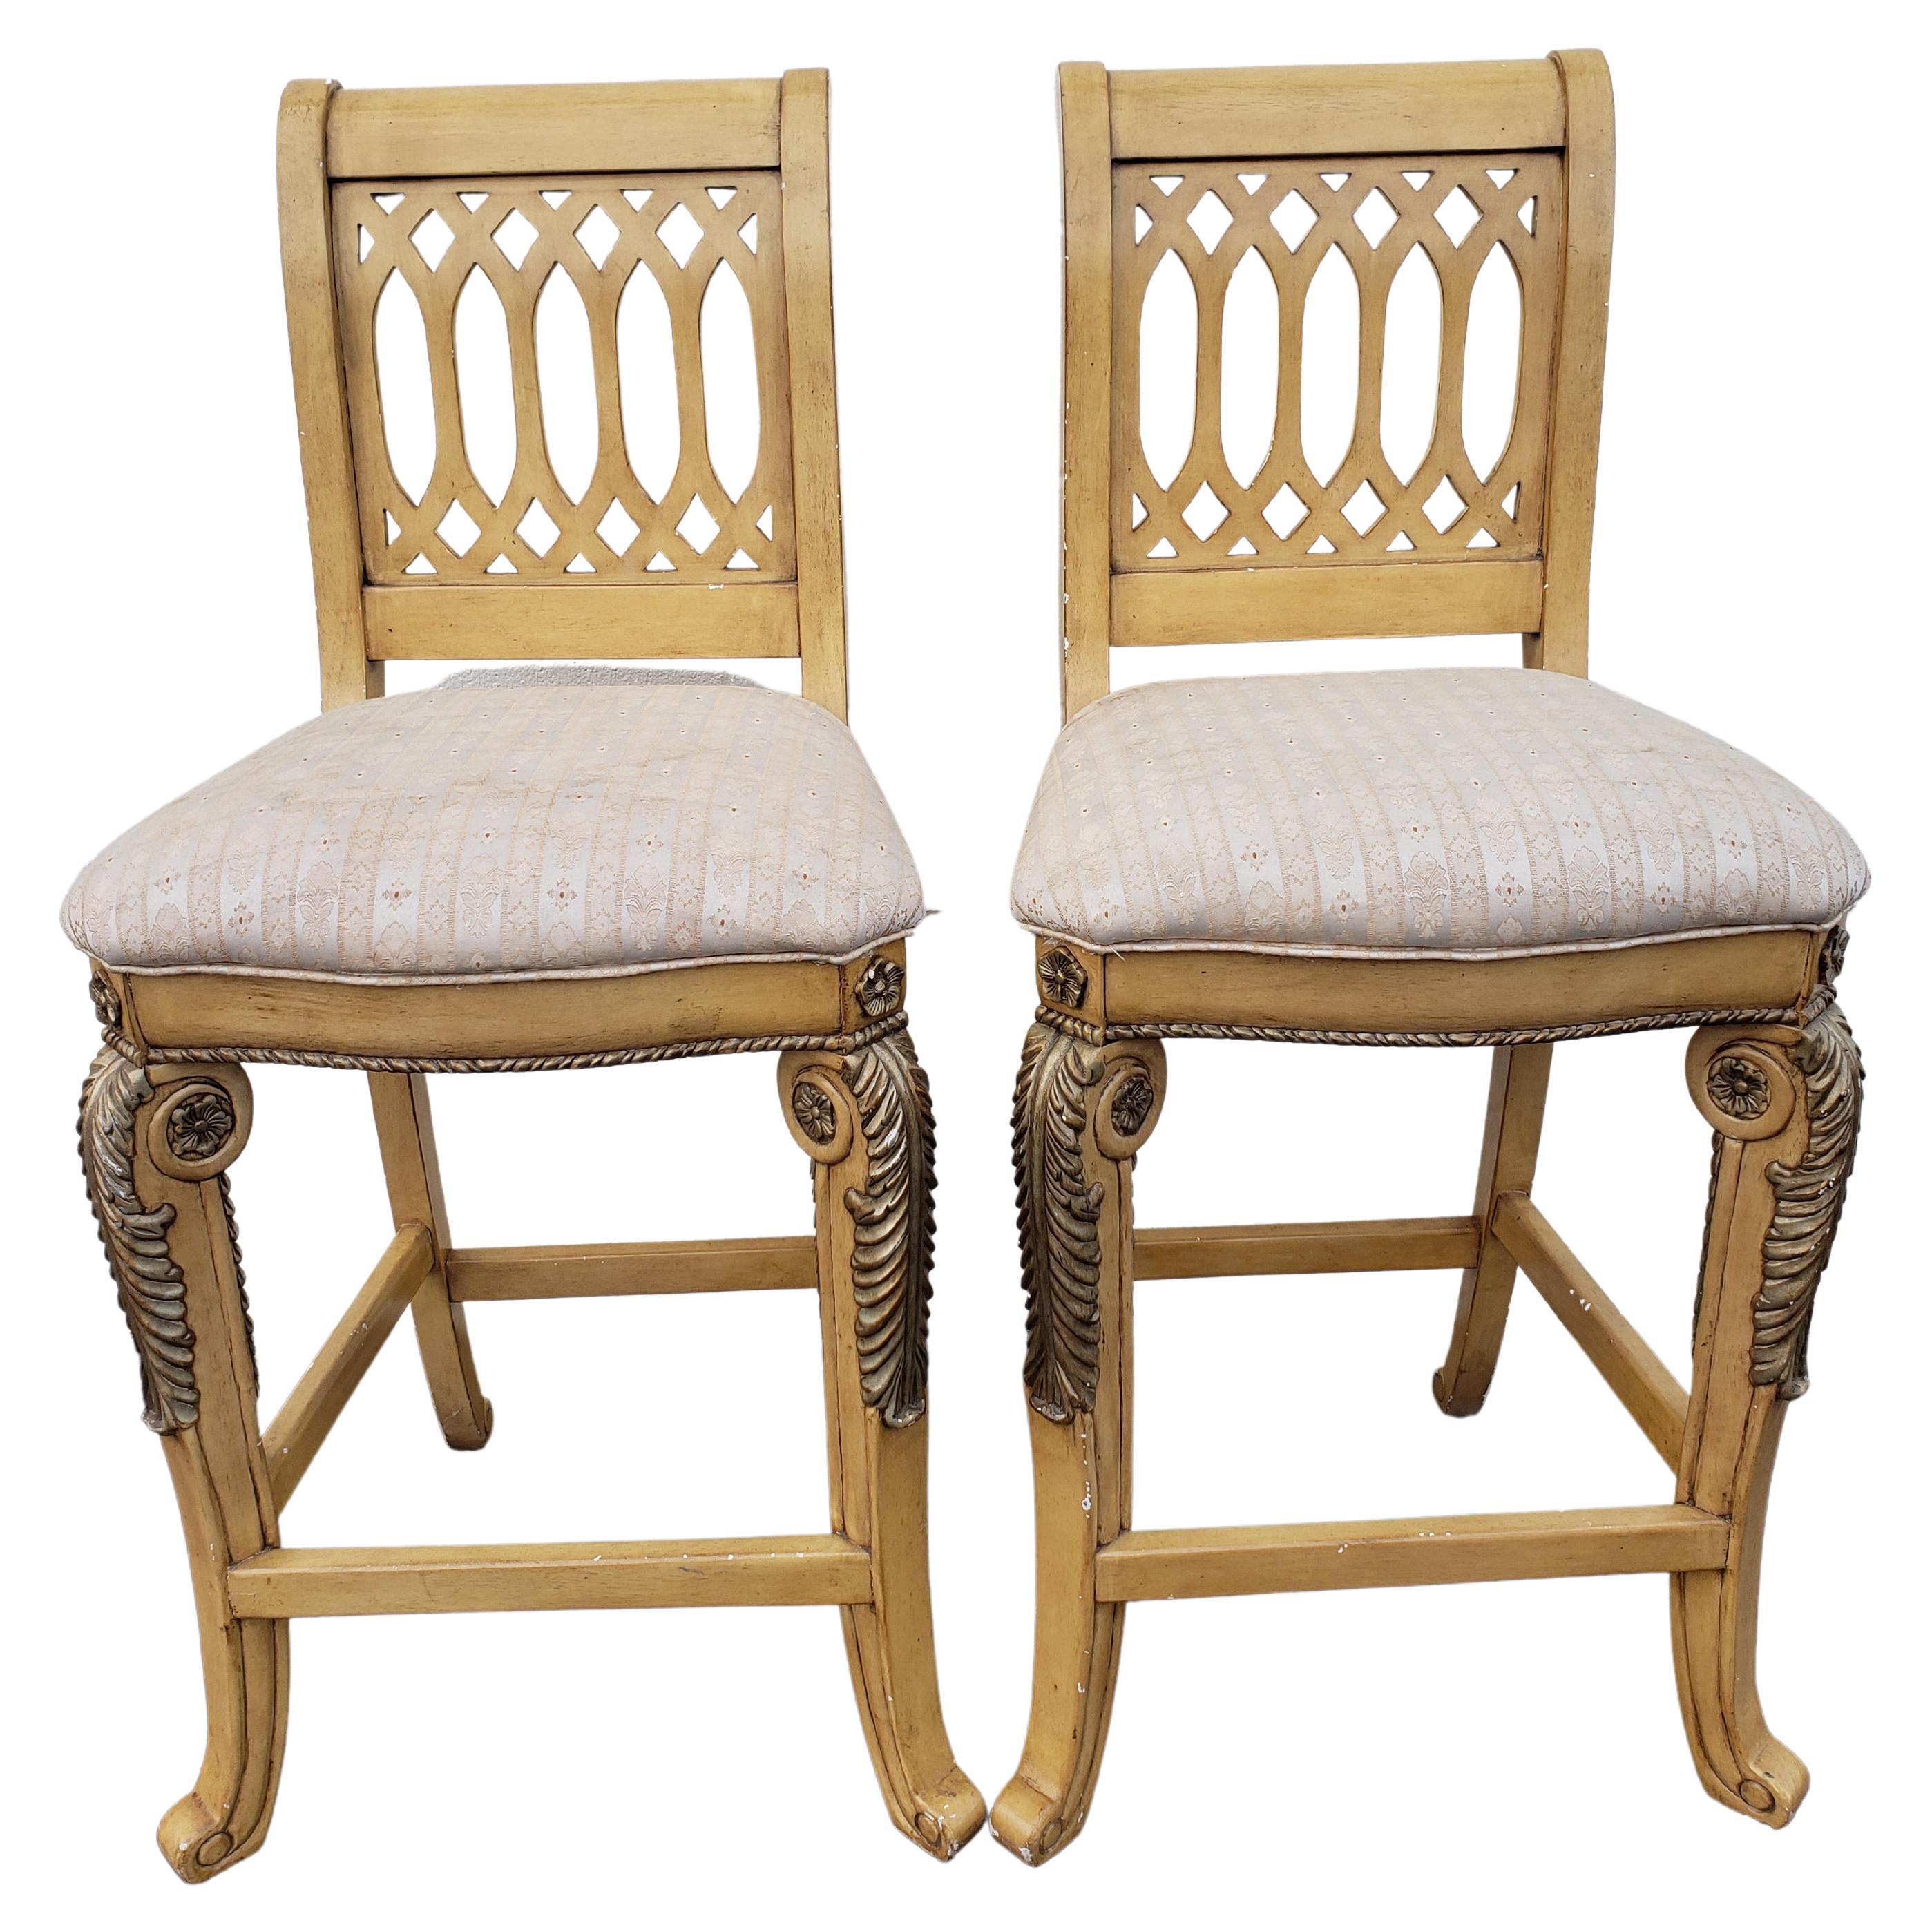 Very unique bistro set from North Carolina by Regency House Inc. Furniture. Entire set made off of Solid maple wood with intricate carvings. Bistro table, coupled as wine holder, hold 7 big bottles and 9 small bottles. Table also Features felt lined